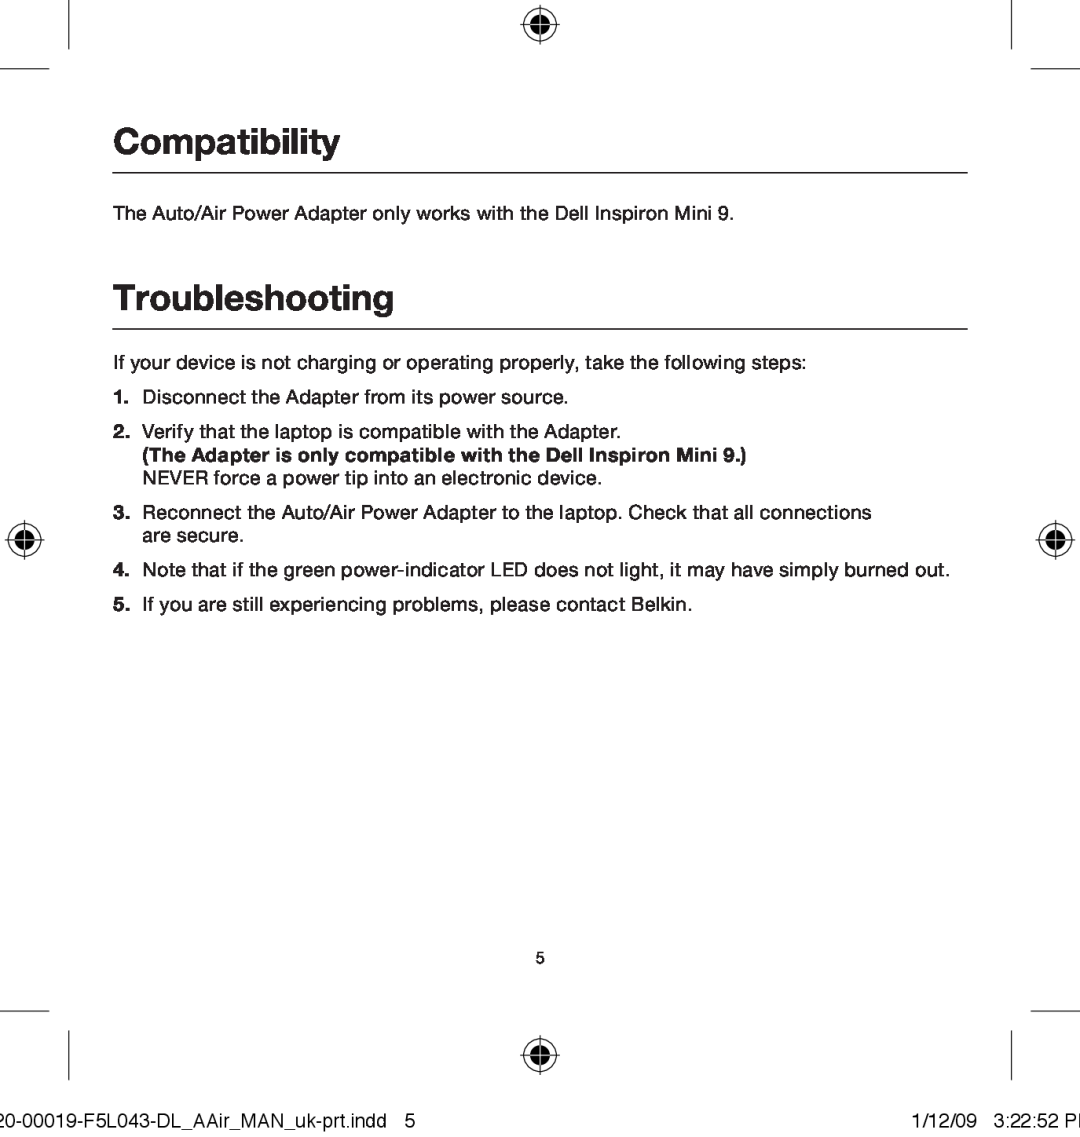 Belkin 0-00019-F5L043 user manual Compatibility, Troubleshooting 